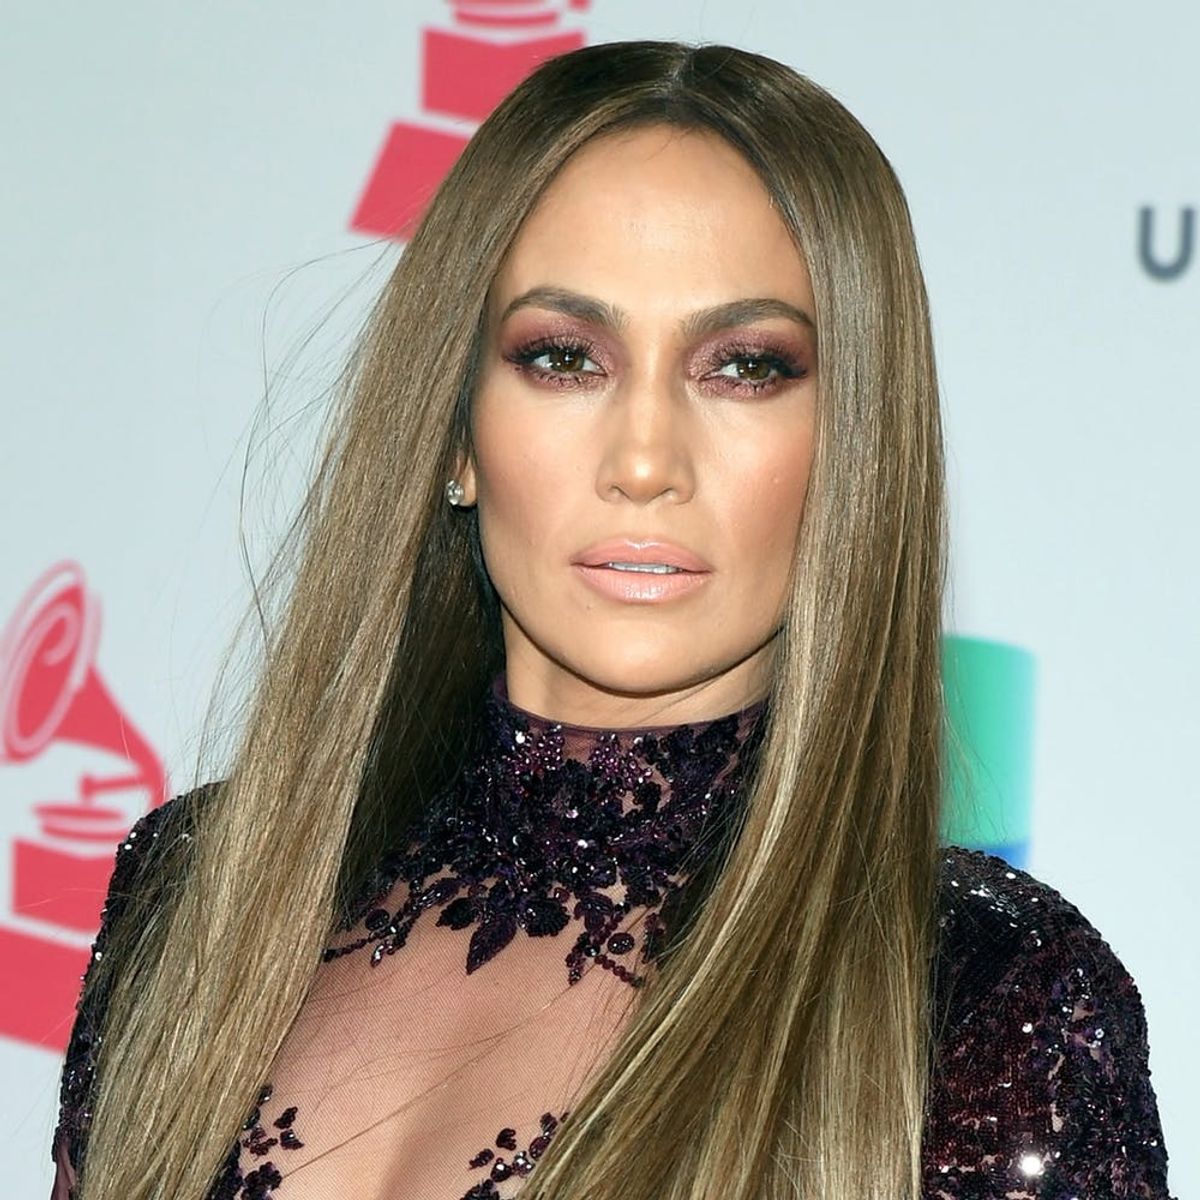 Did J. Lo Just Diss Mariah Carey After Her NYE Performance Flop?